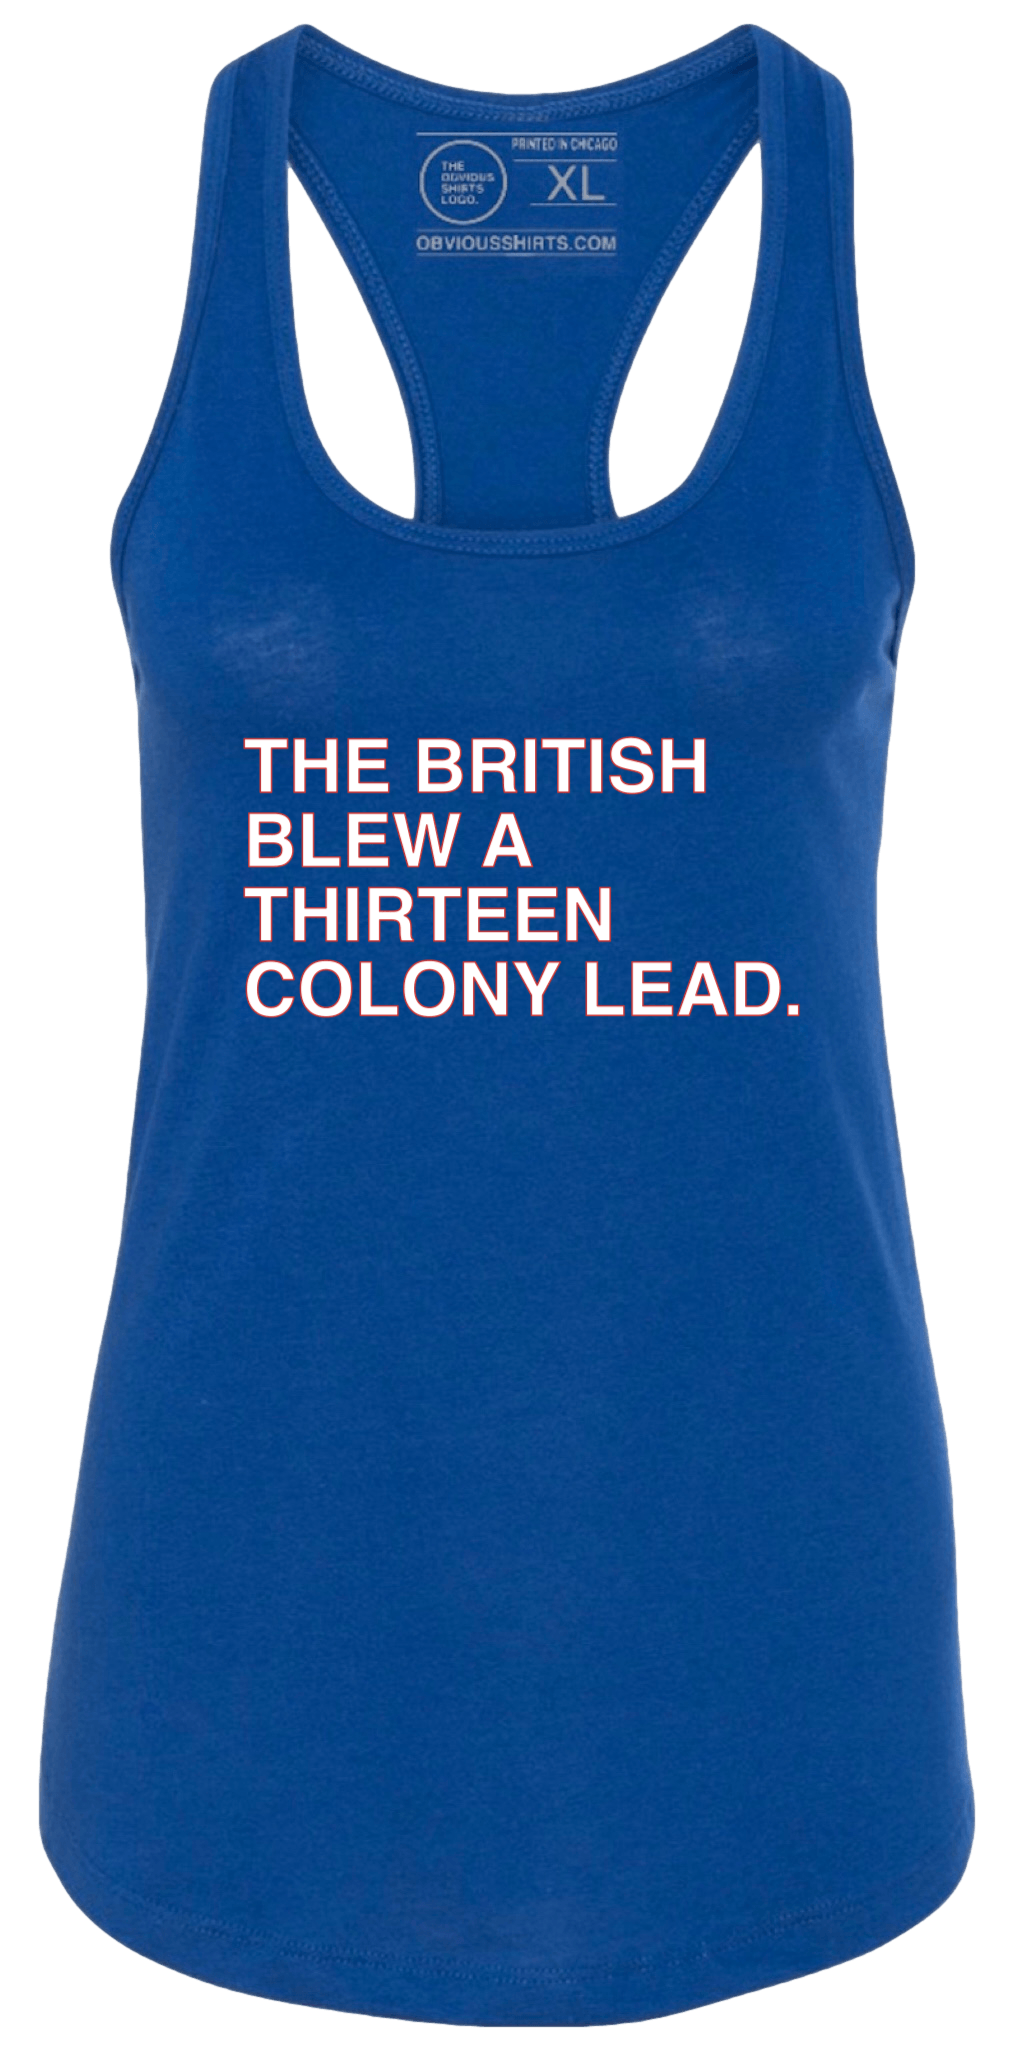 THE BRITISH BLEW A THIRTEEN COLONY LEAD. (WOMEN'S TANK) - OBVIOUS SHIRTS